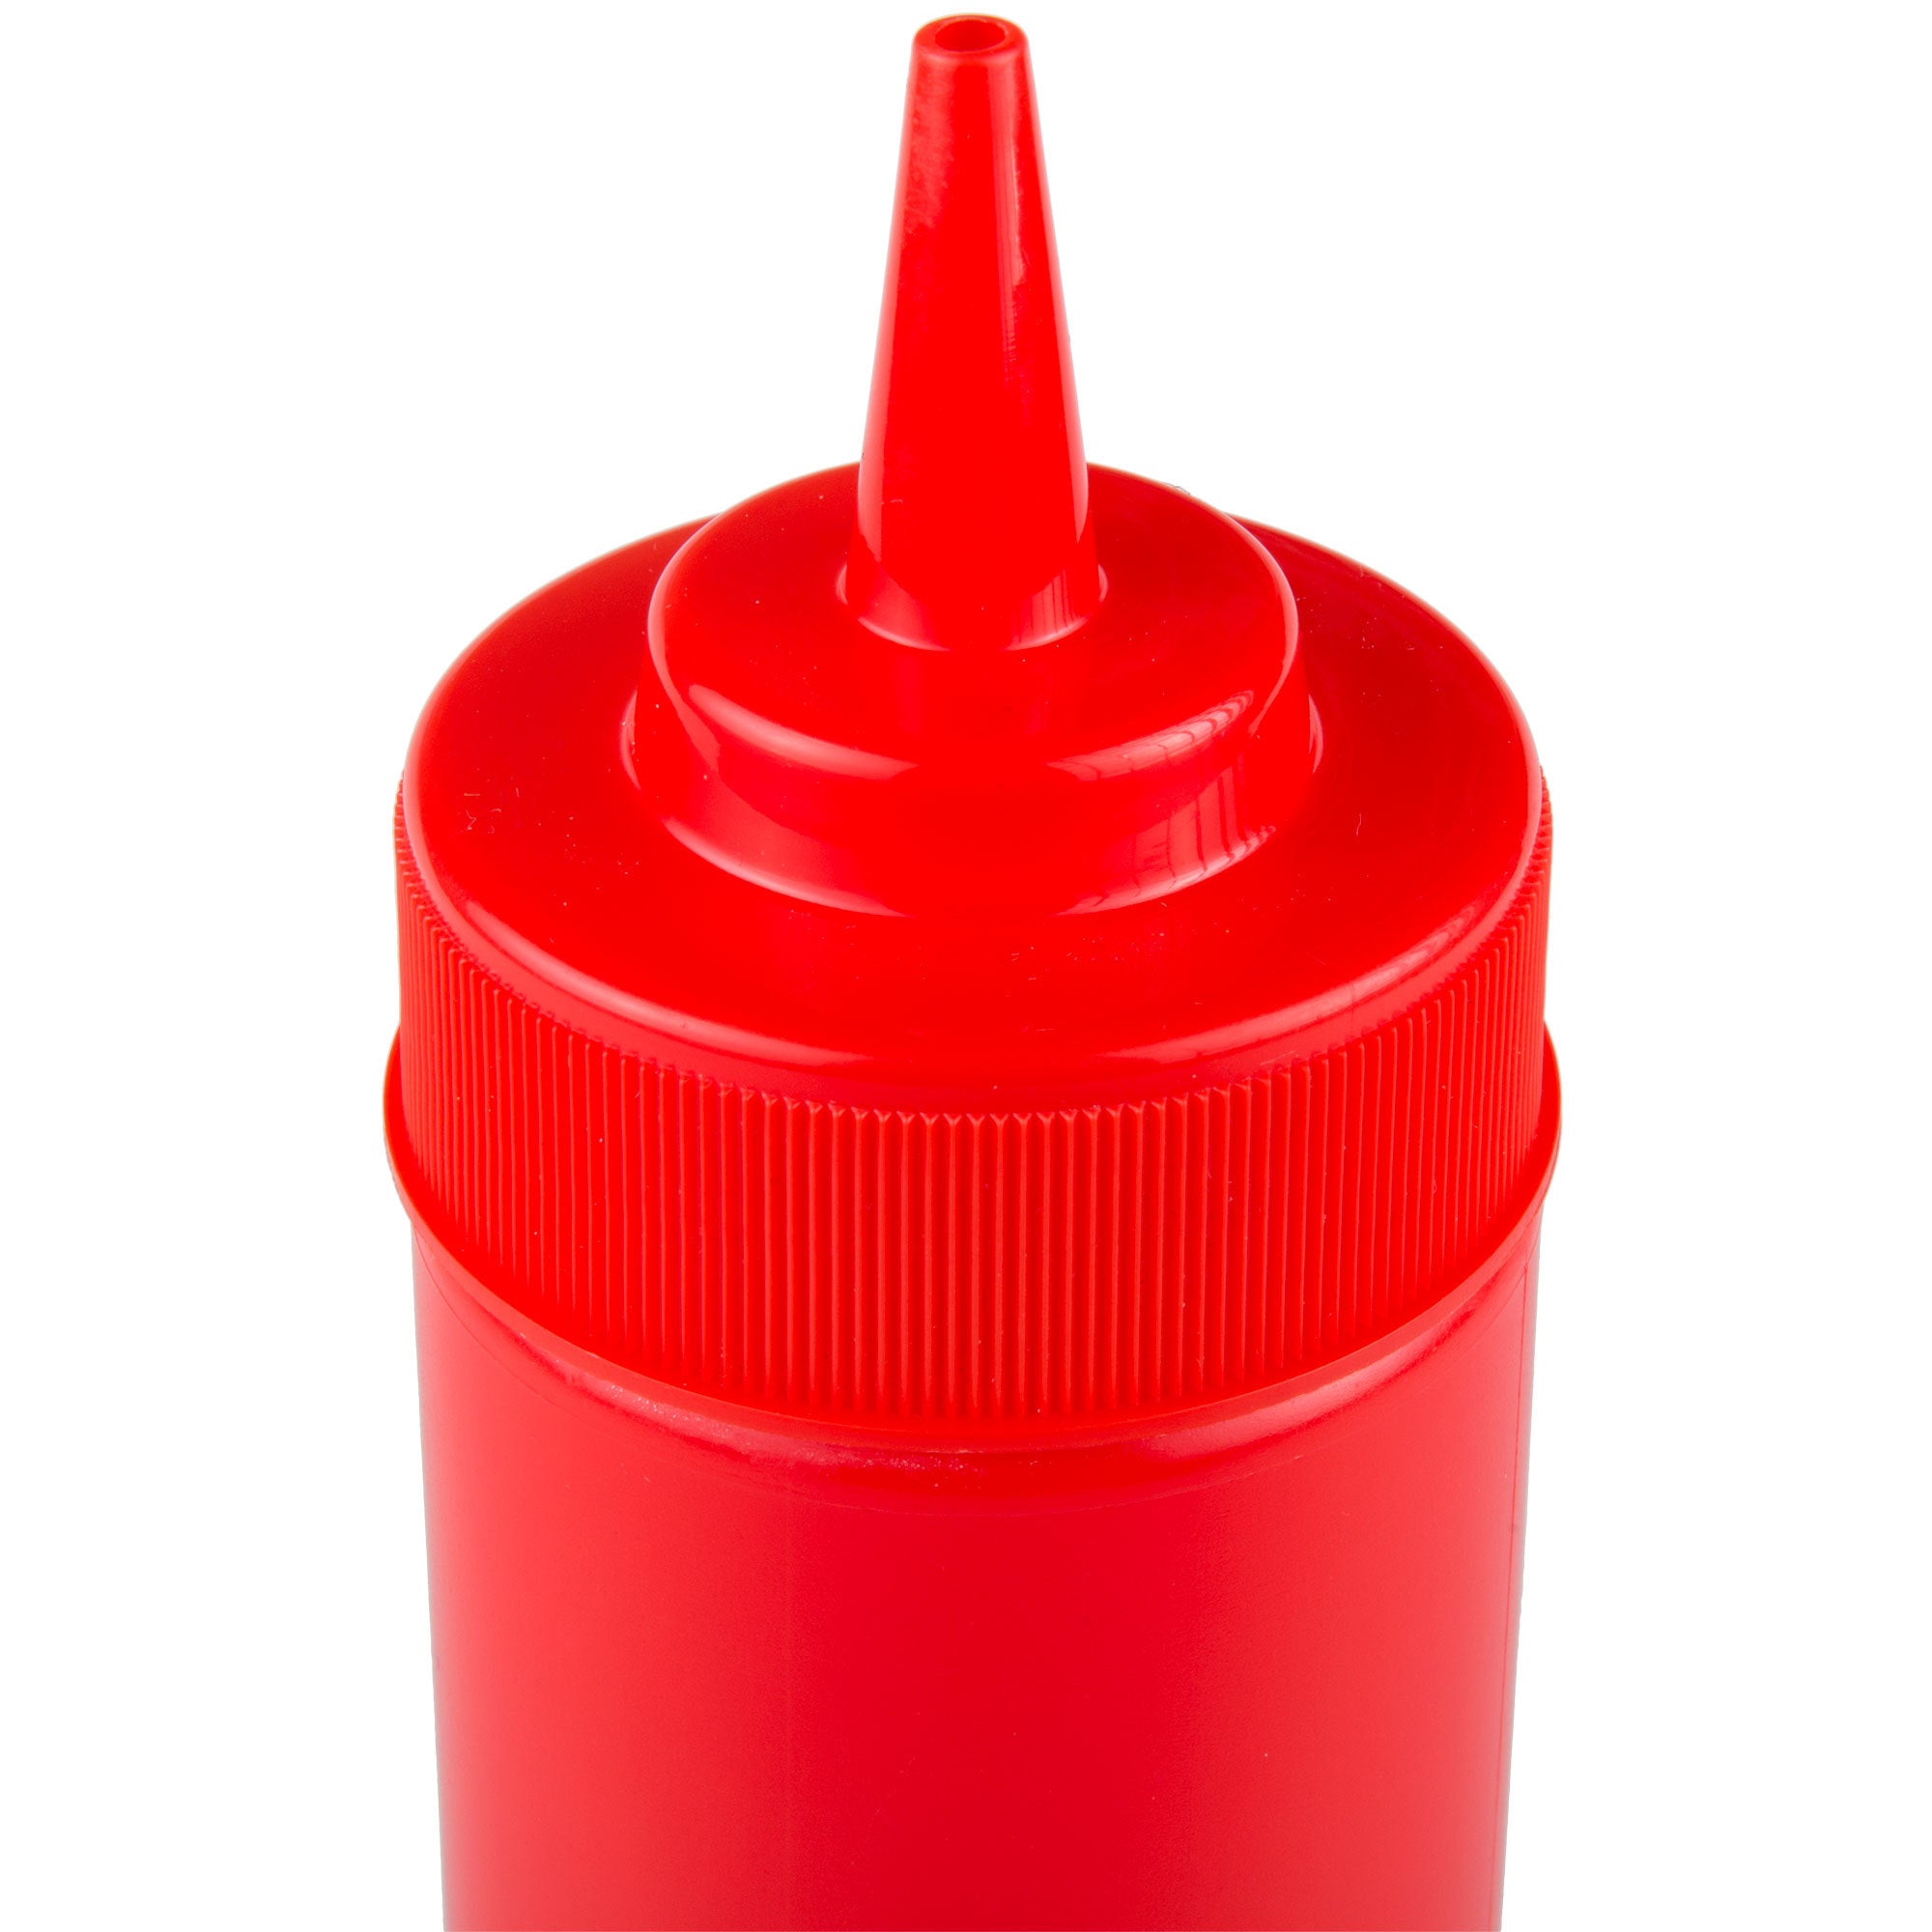 12oz, Wide Mouth Red Squeeze Bottle